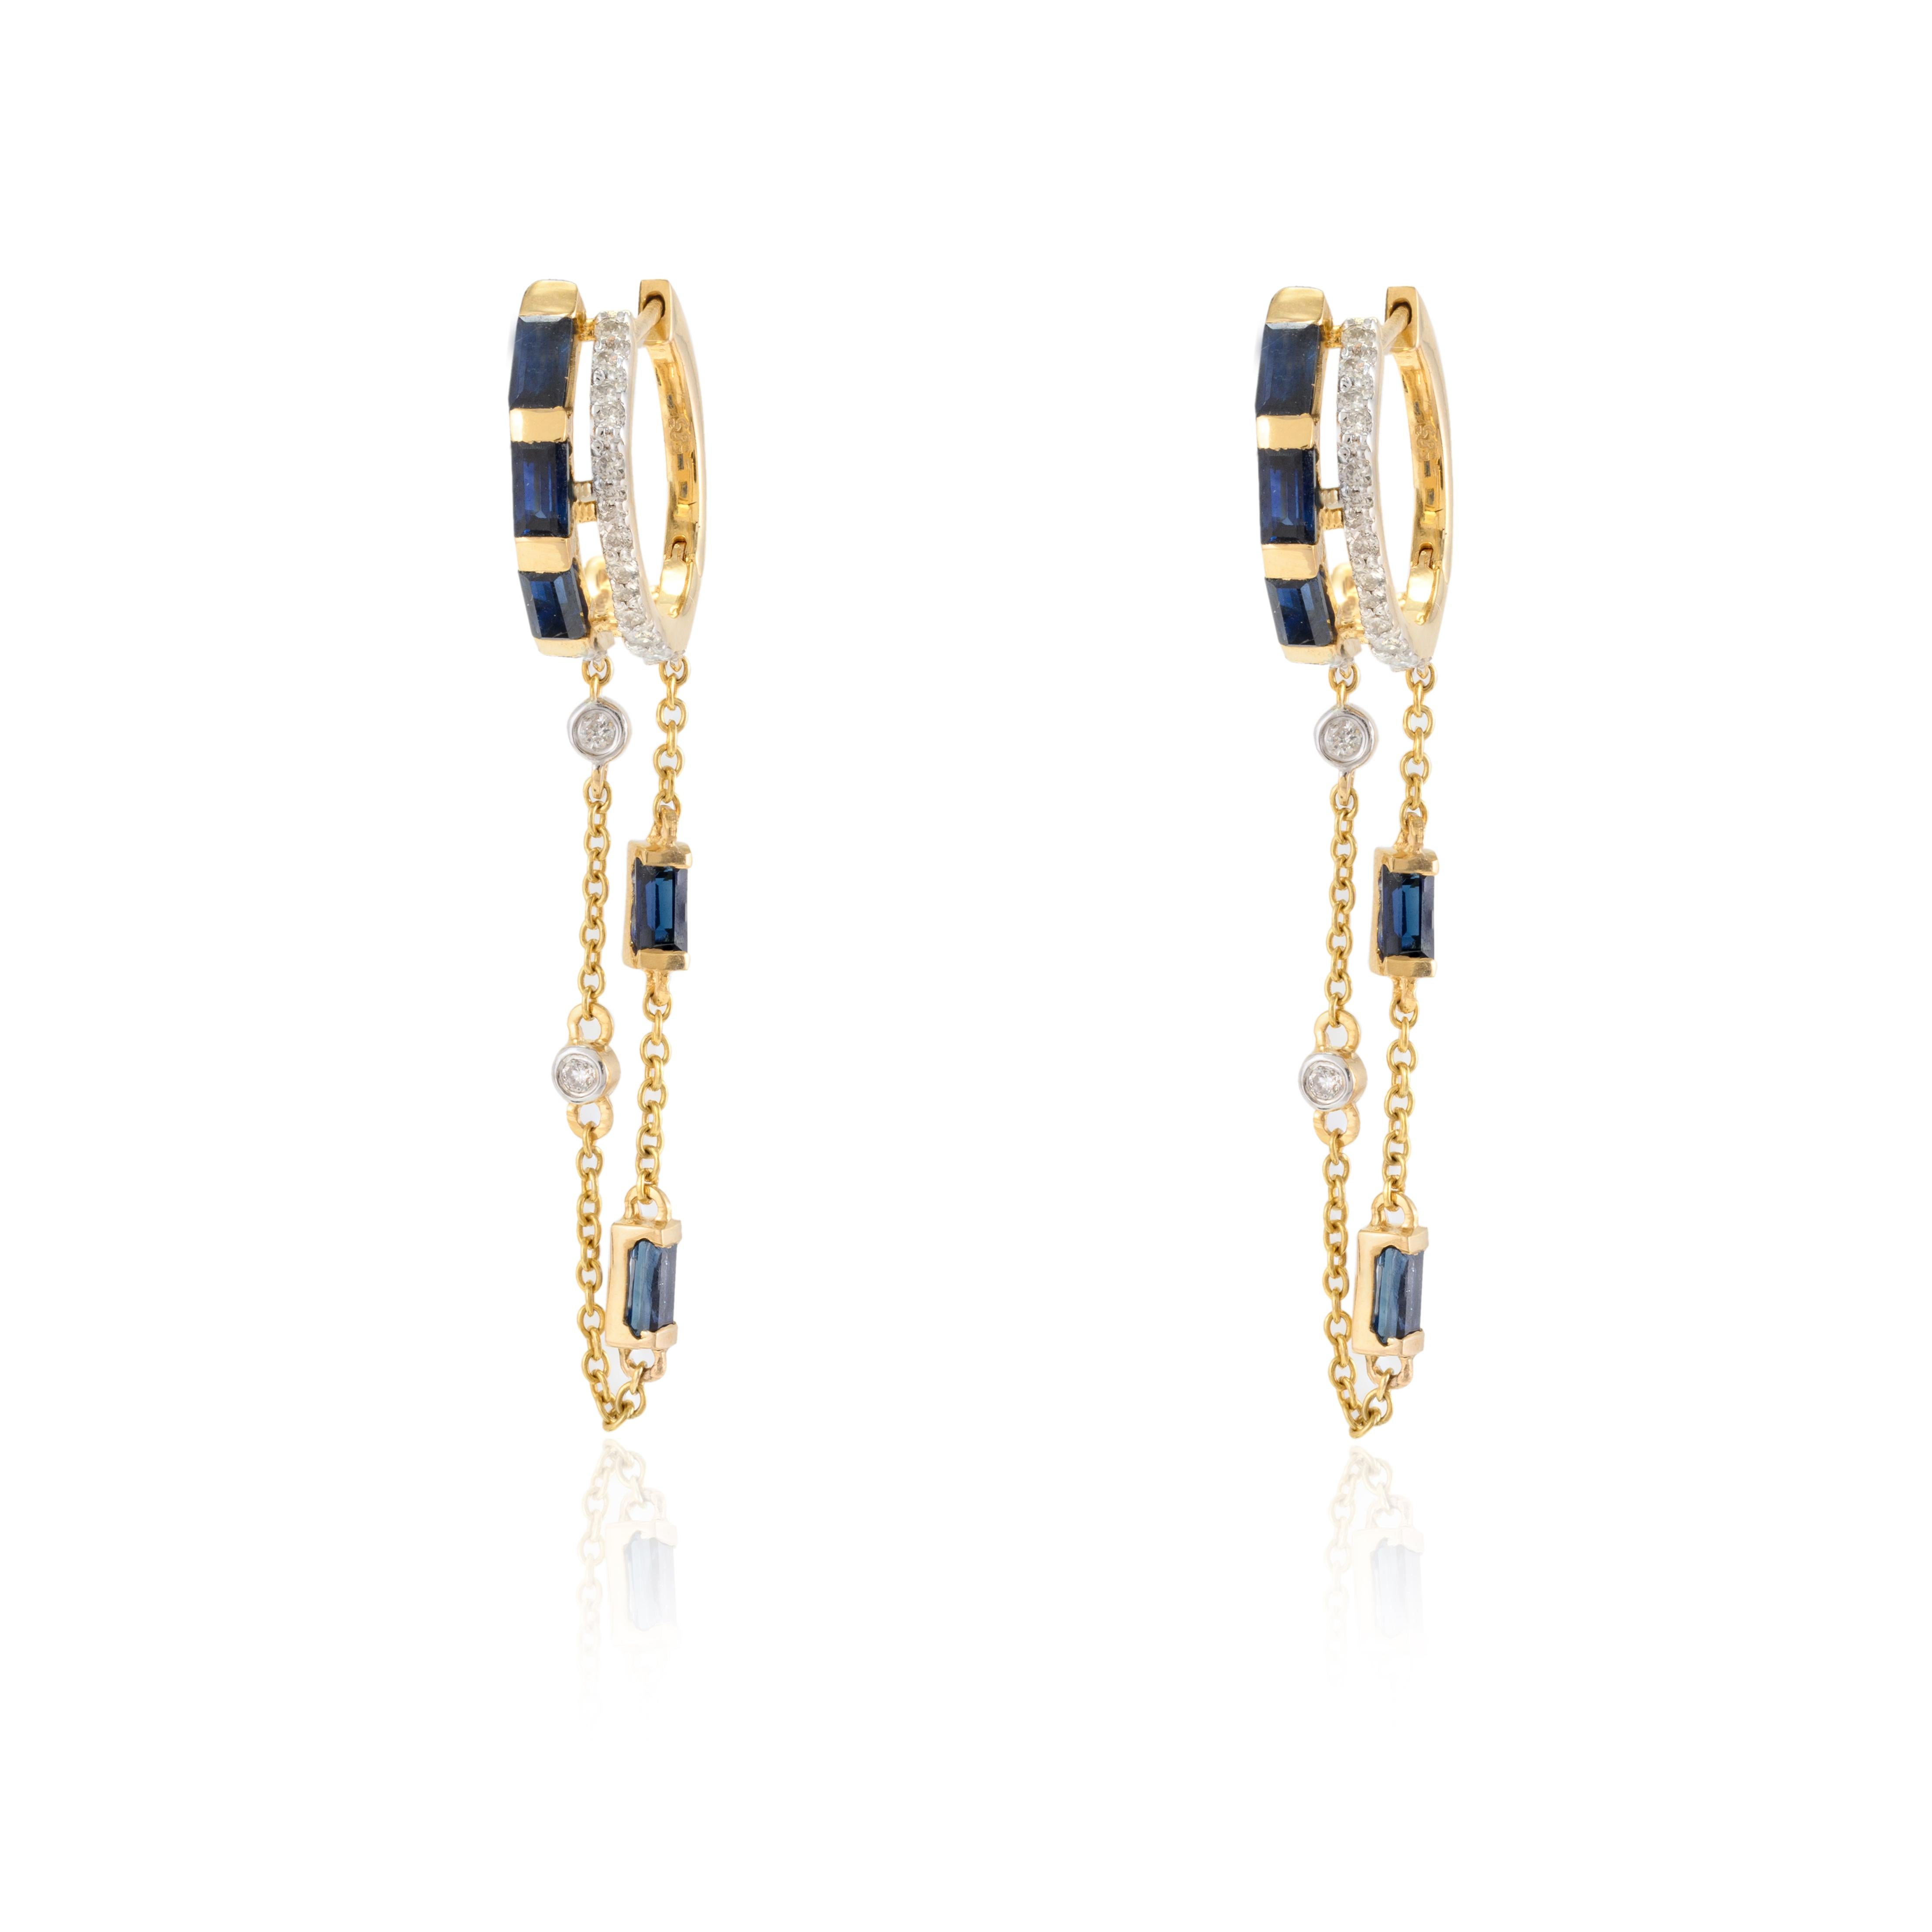 Baguette Cut Unique Blue Sapphire and Diamond Dangling Chain Earrings in 14k Yellow Gold For Sale